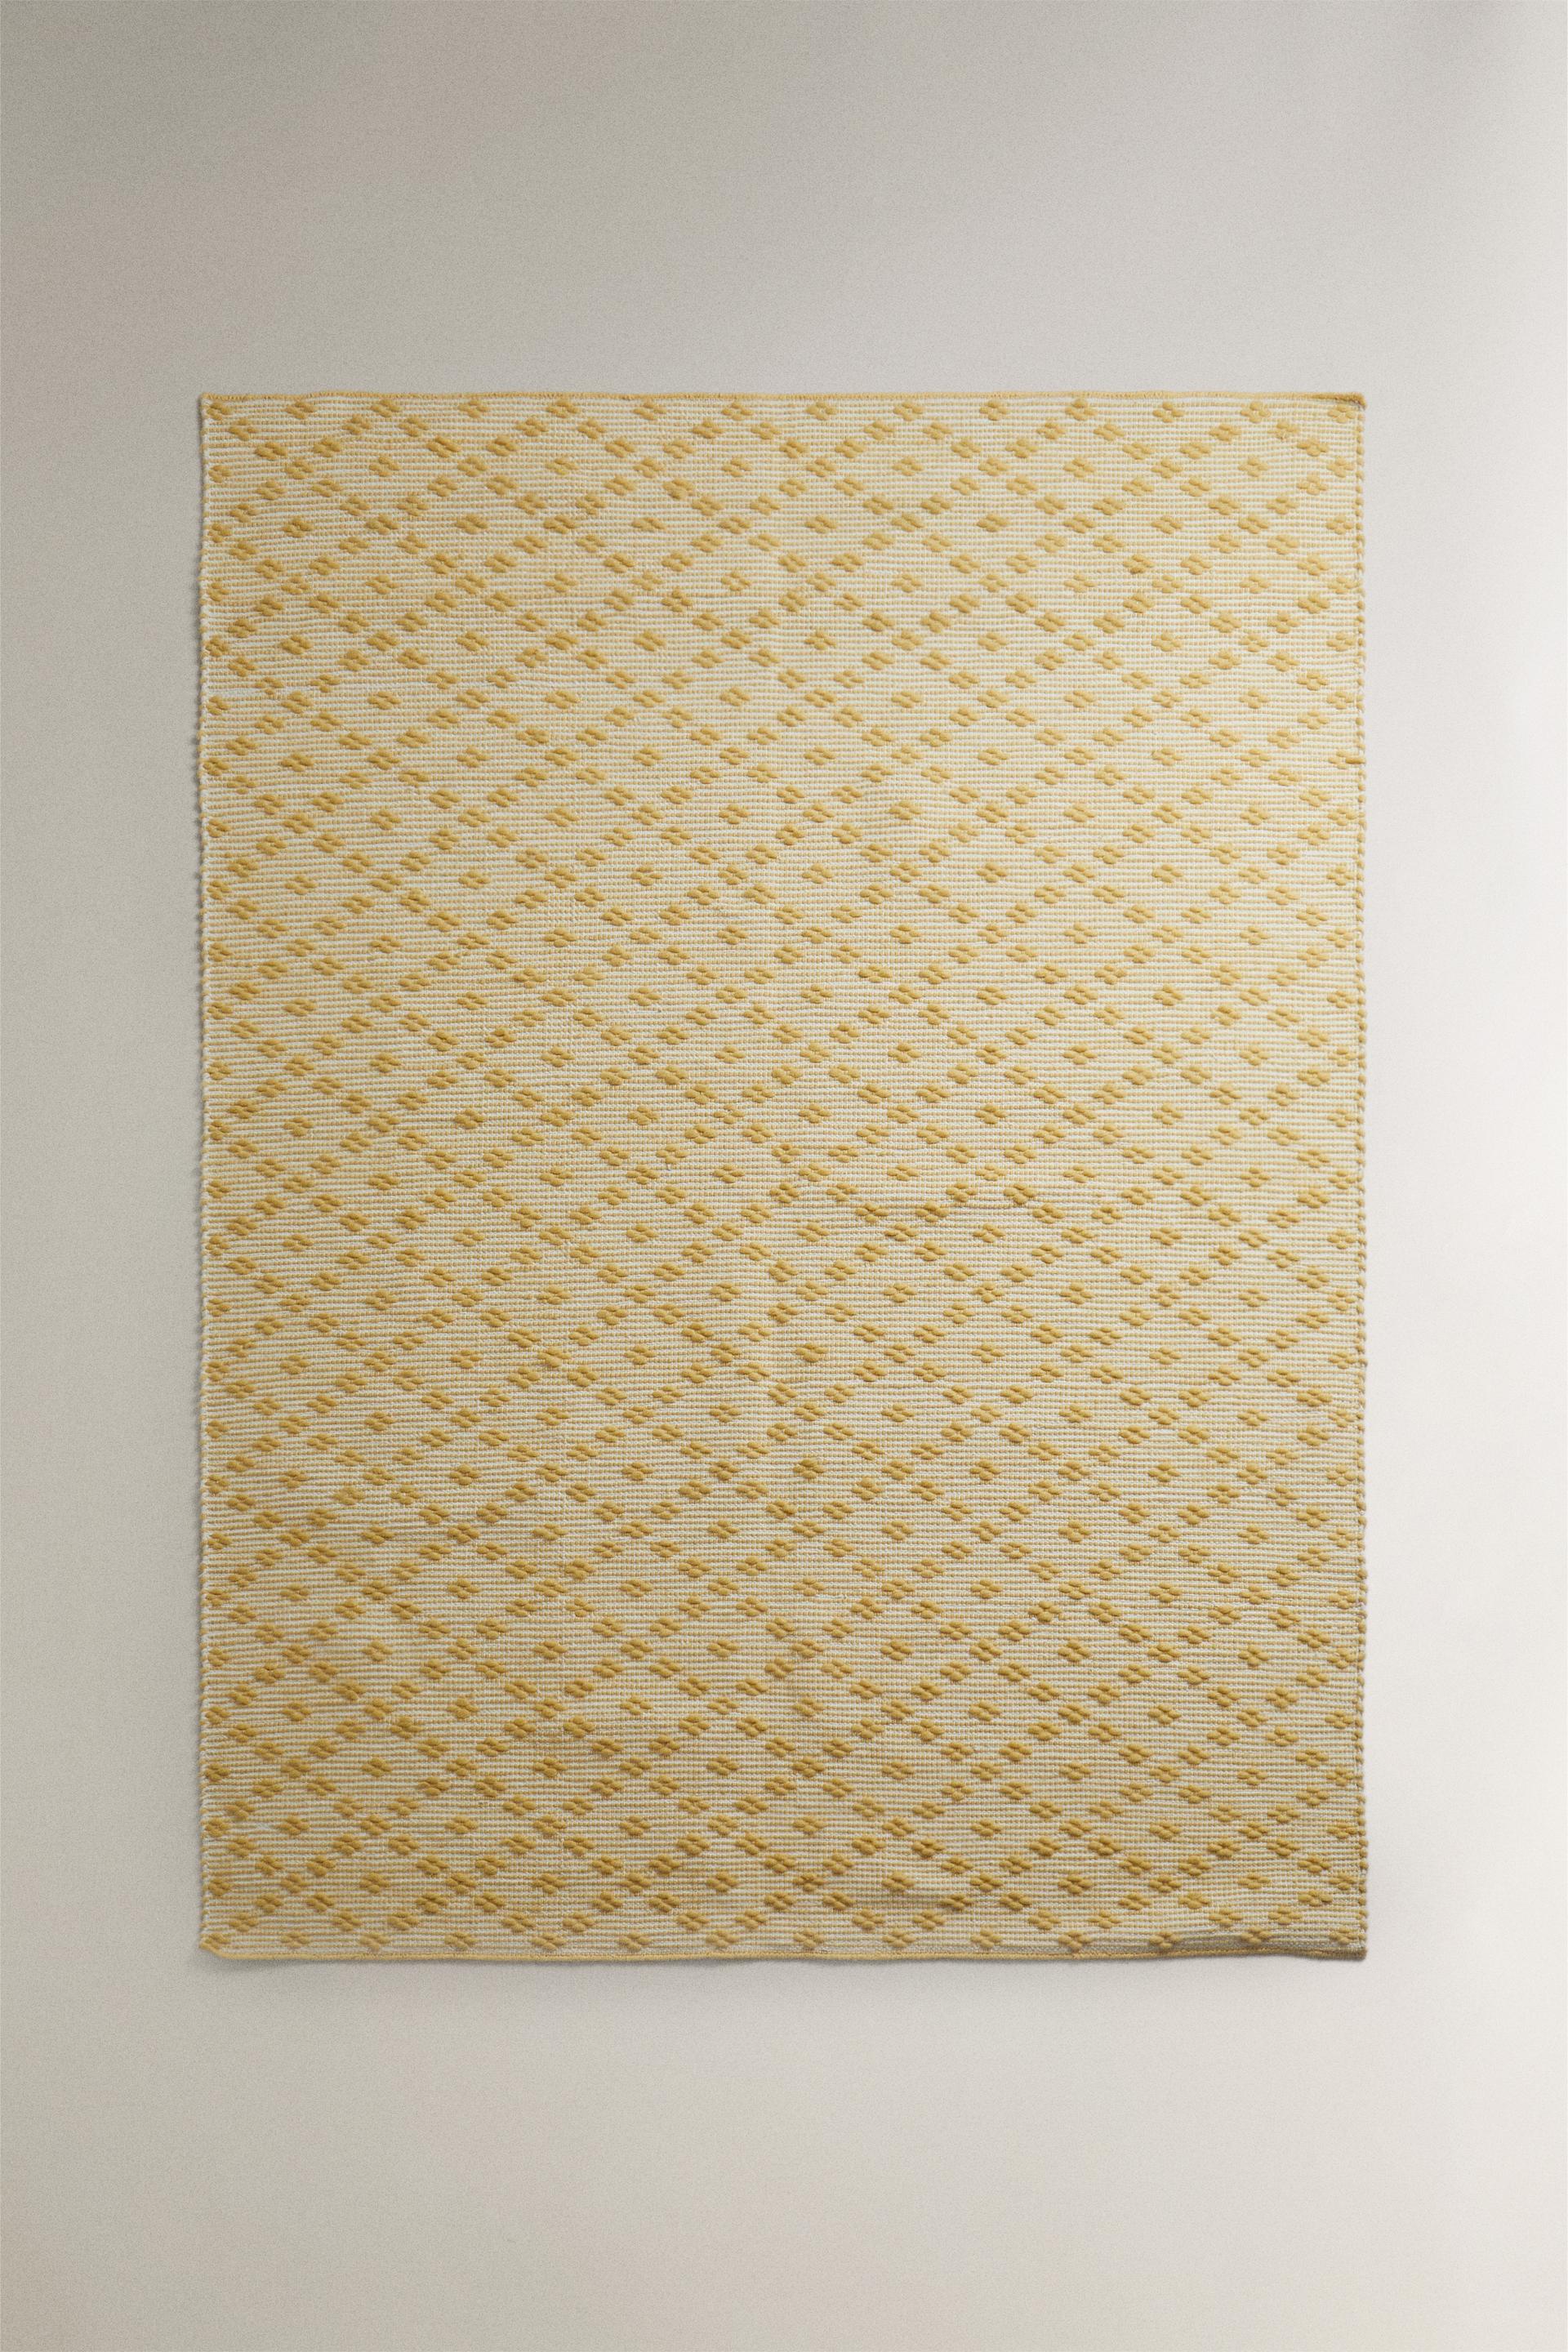 BRAIDED COTTON AND WOOL AREA RUG ZARA